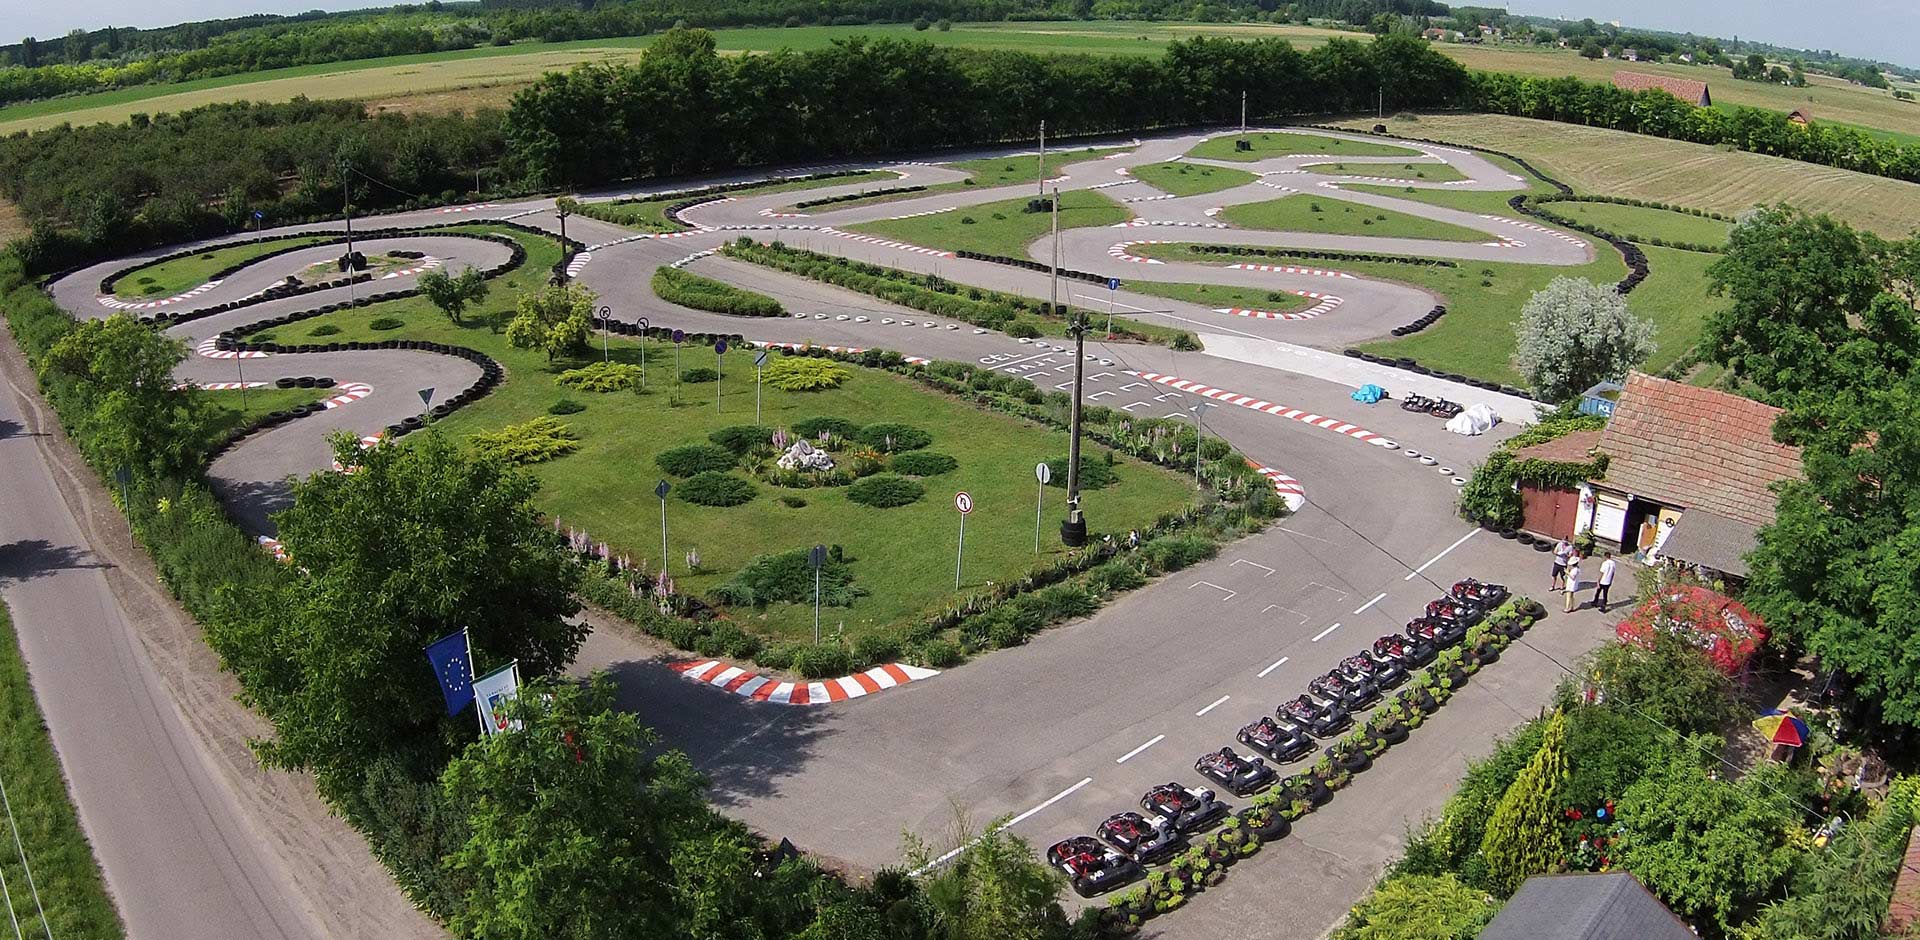 Welcome to the Bognar Karting Park <p> </ p>
Hungary's longest (820 m) built an amateur go-kart track